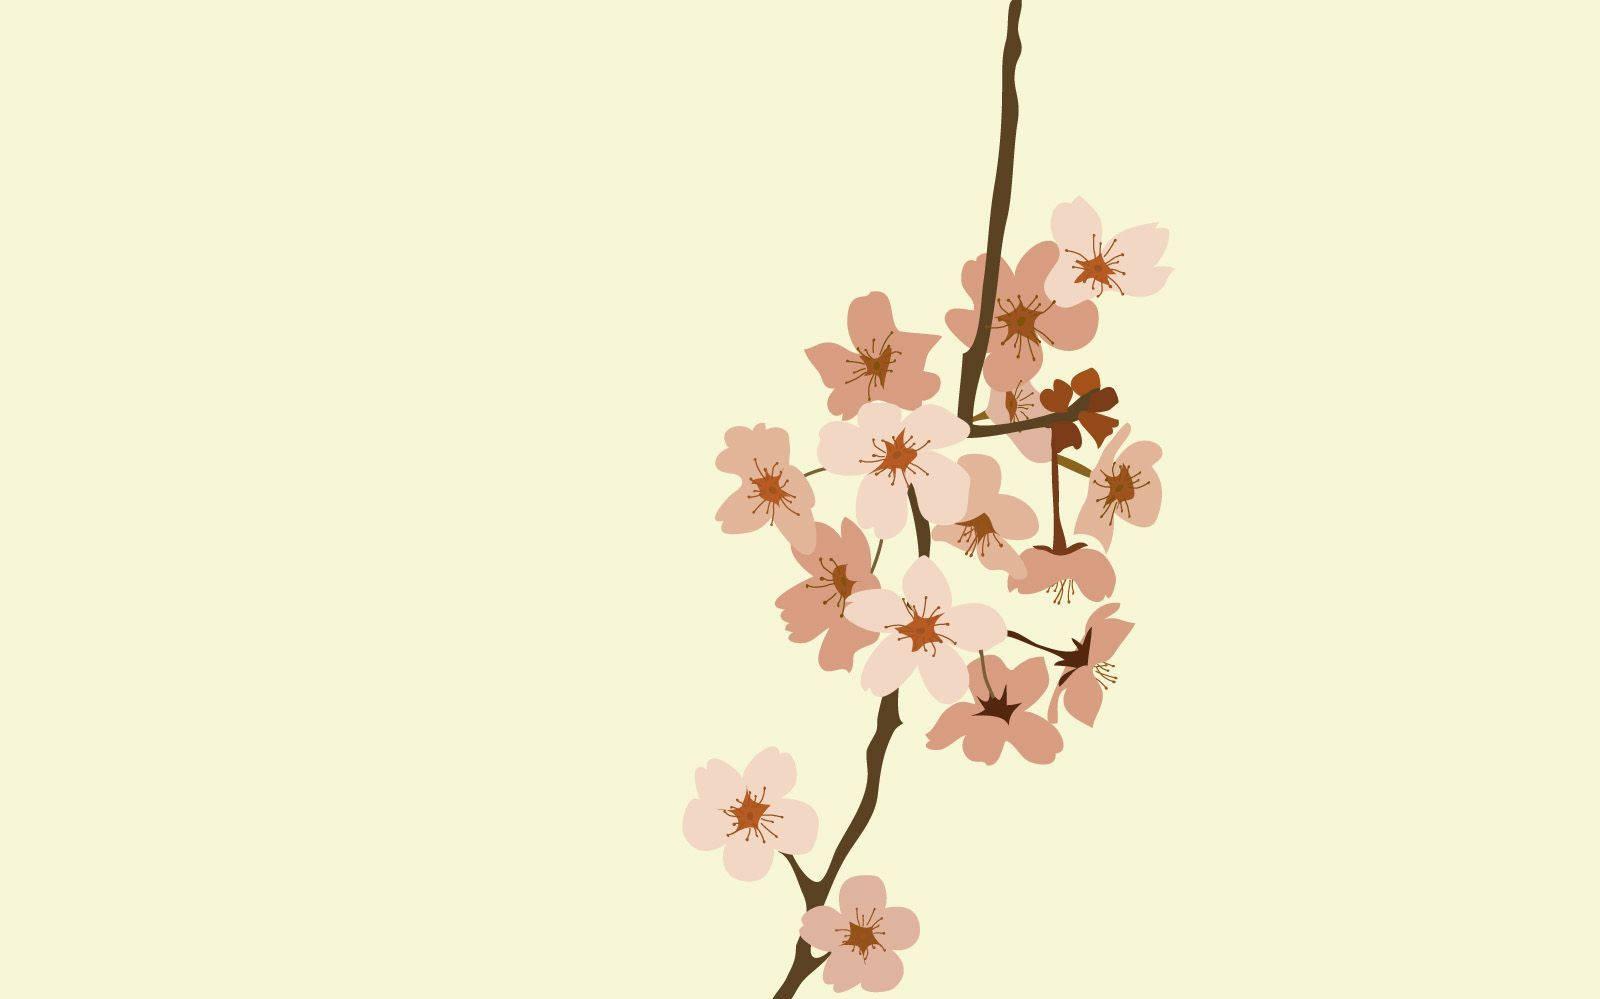 The Beauty Of Spring In Minimalist Form Wallpaper